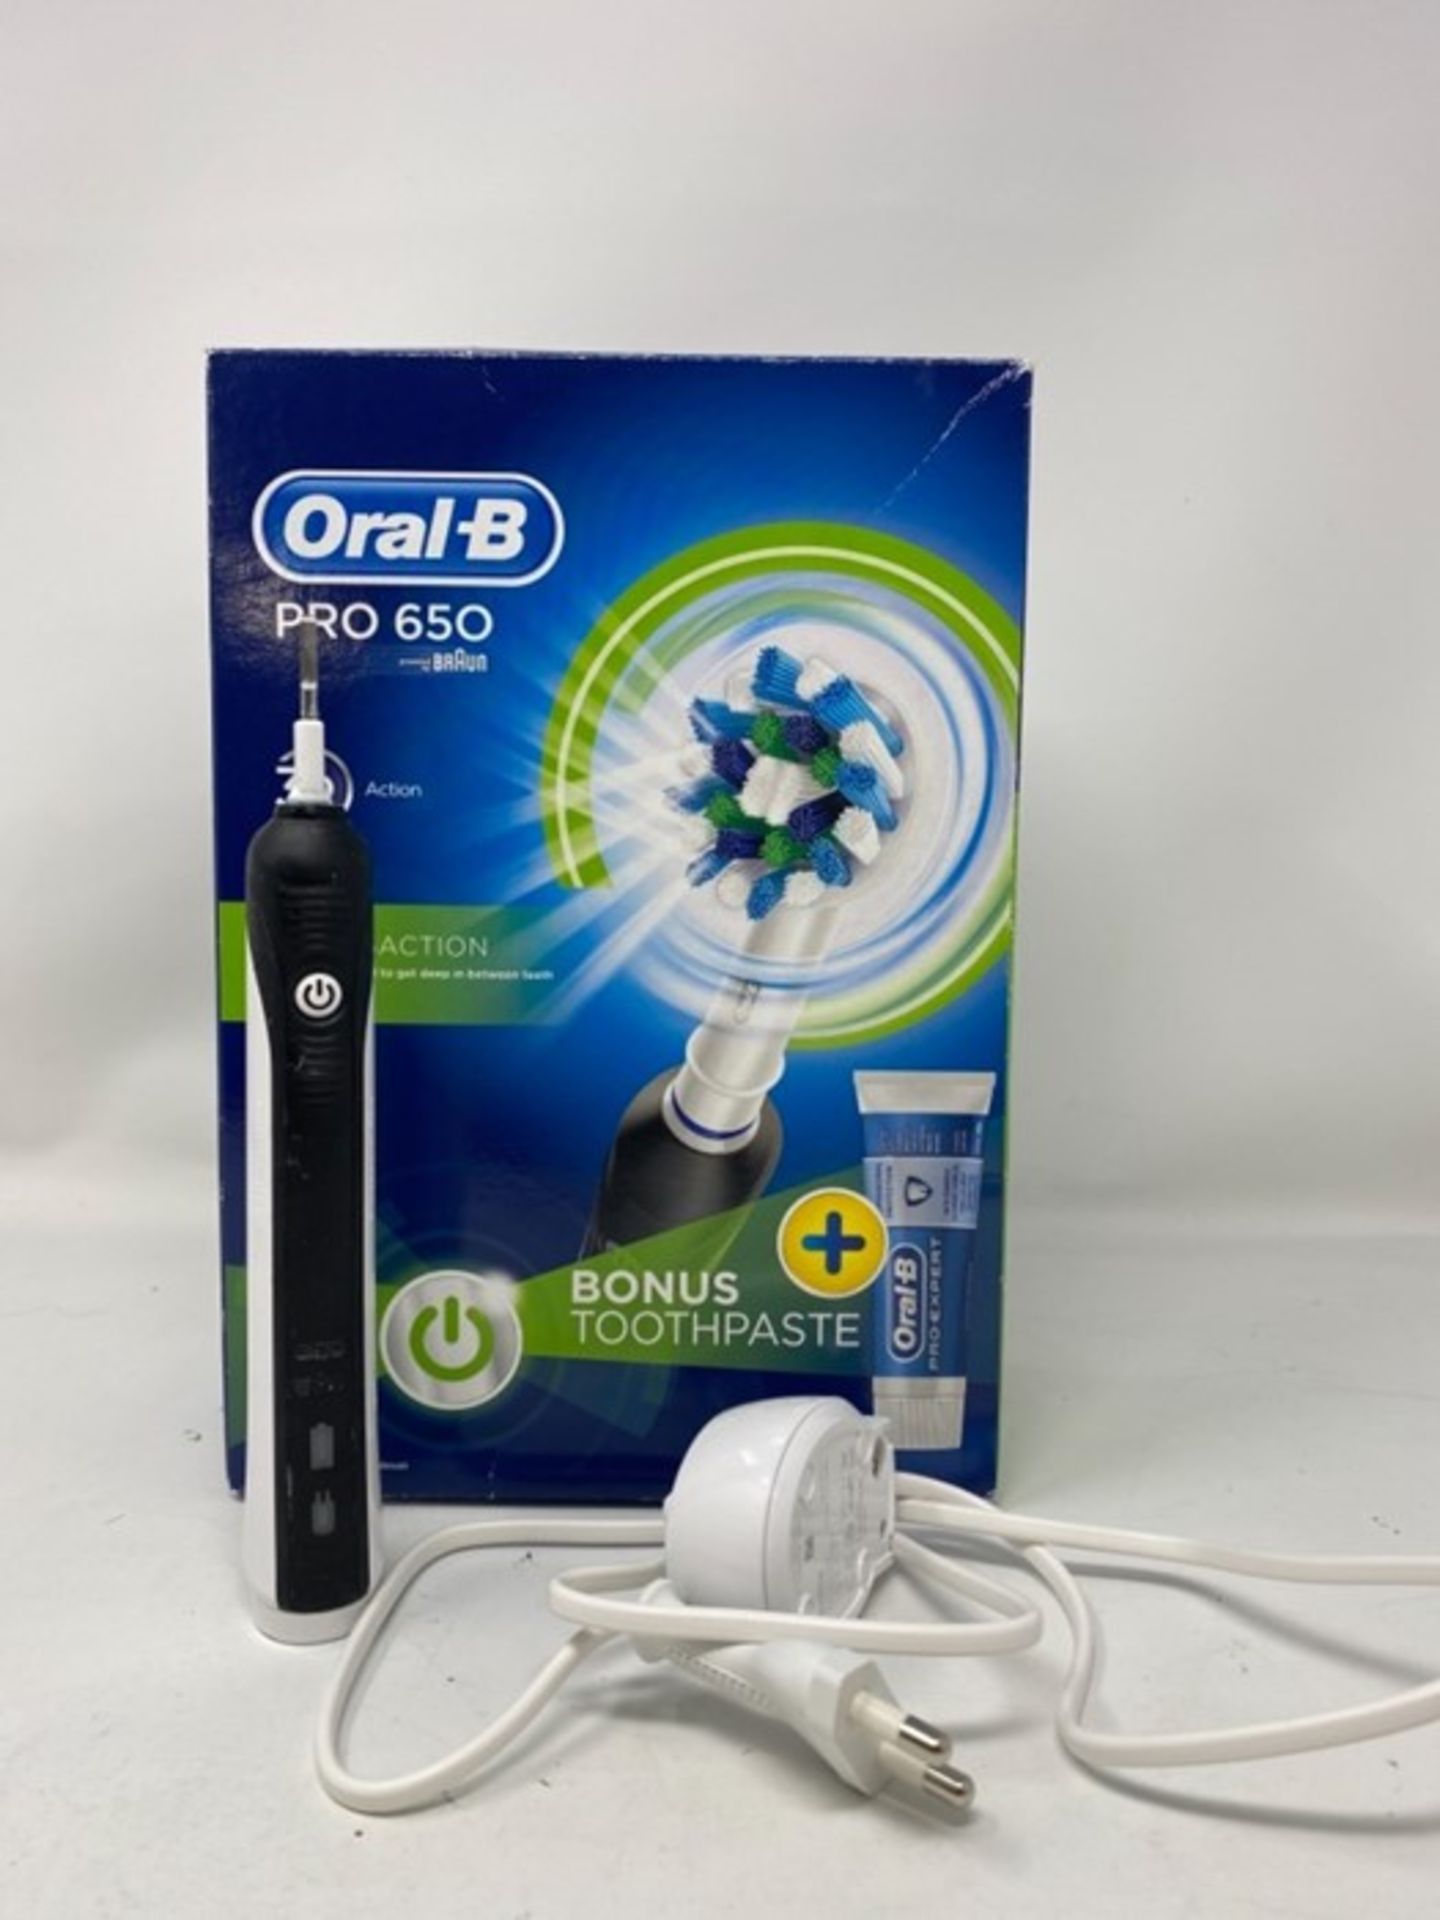 Oral-B Pro 650 Cross Action Electric Rechargeable Toothbrush Powered by Braun, 1 Black